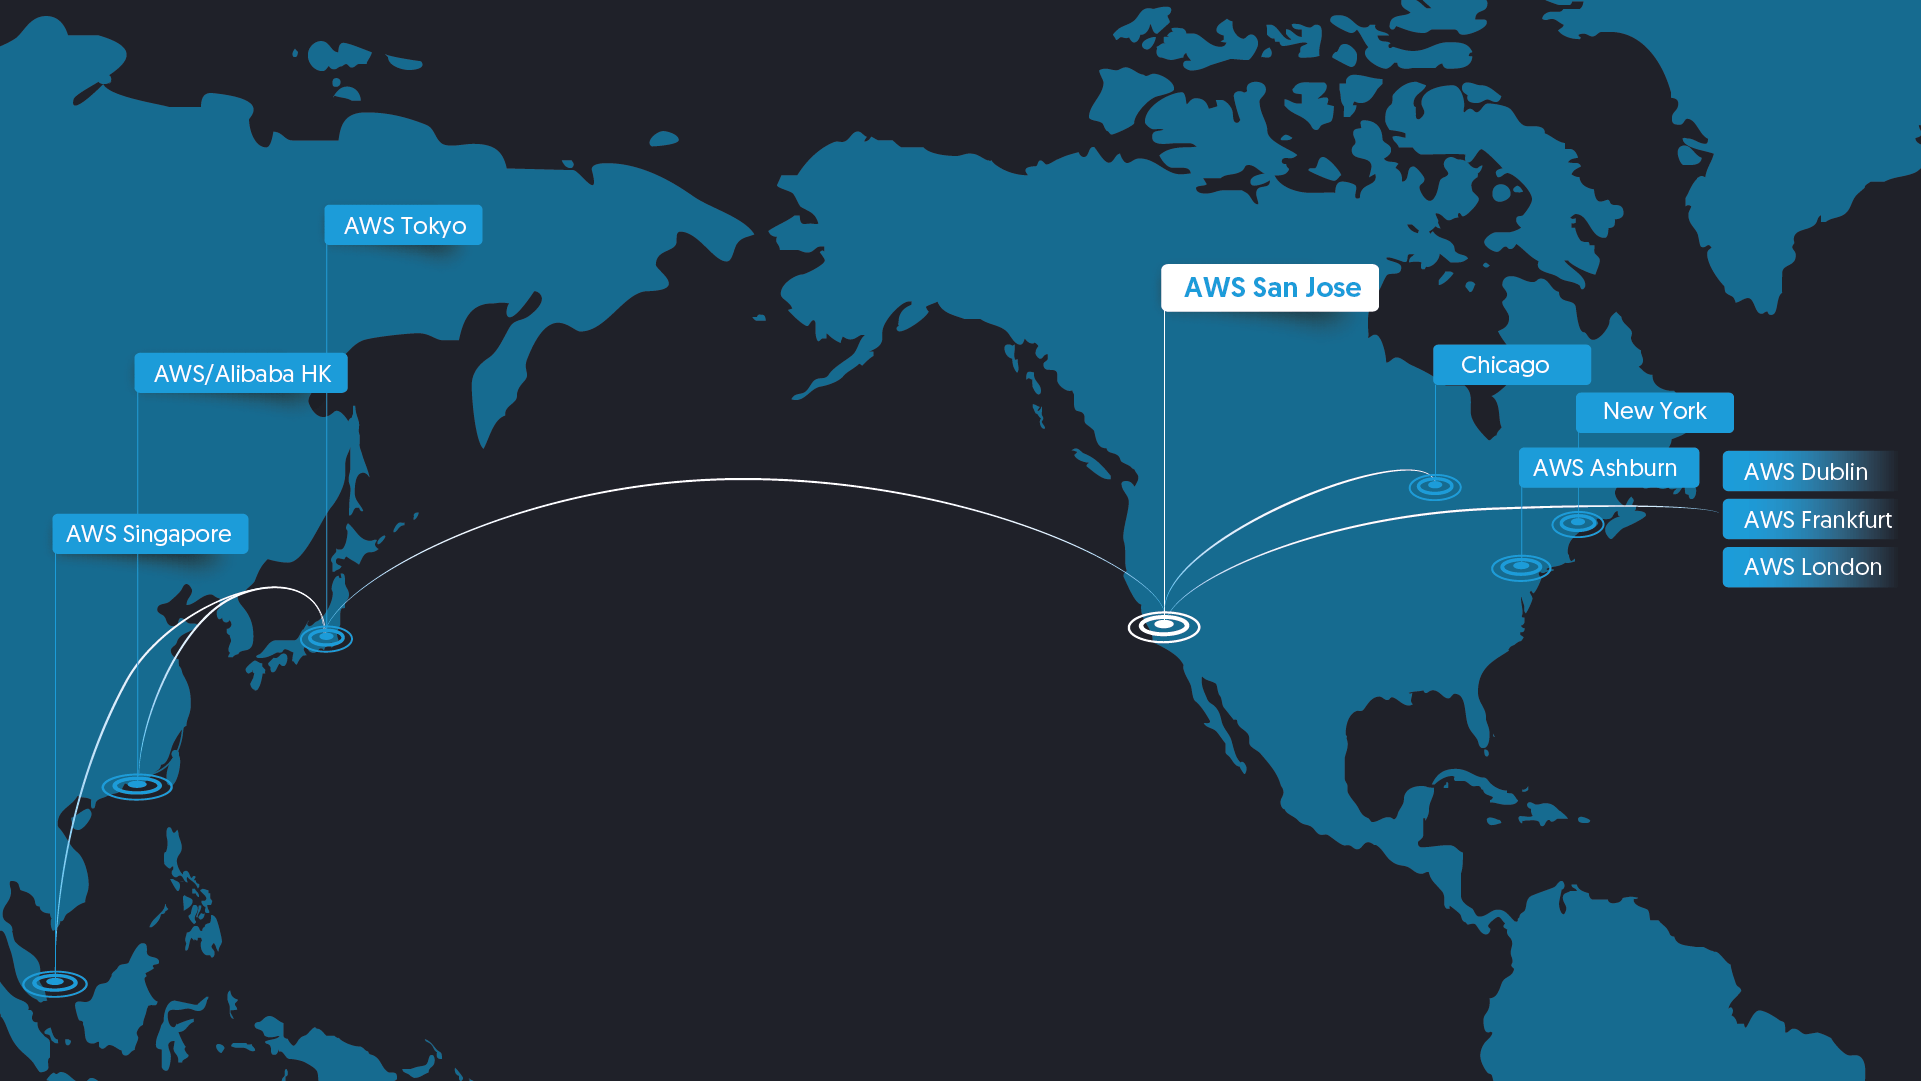 Avelacom extends low latency connectivity and data solutions  to AWS US West (N. California) region